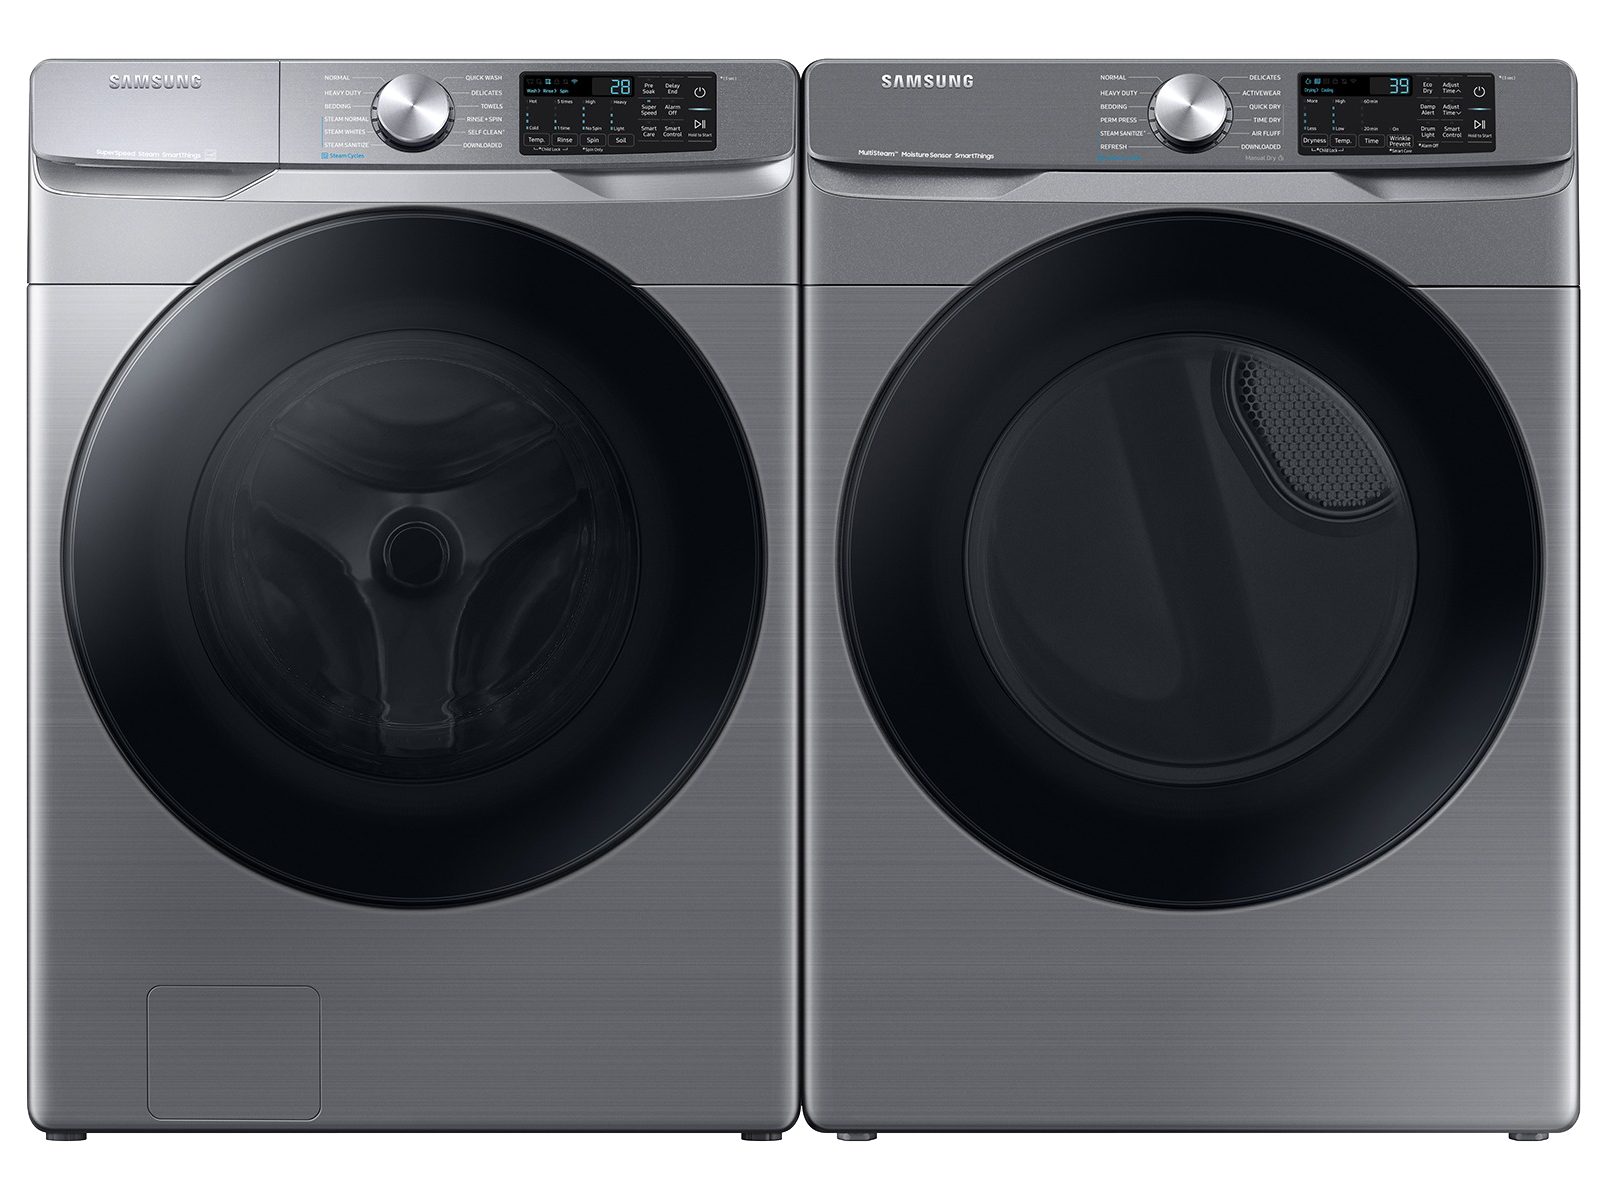 Samsung Large Capacity Smart Front Load Washer with Super Speed Wash & Smart Gas Dryer with Steam Sanitize+ in Platinum(BNDL-1651775353303)